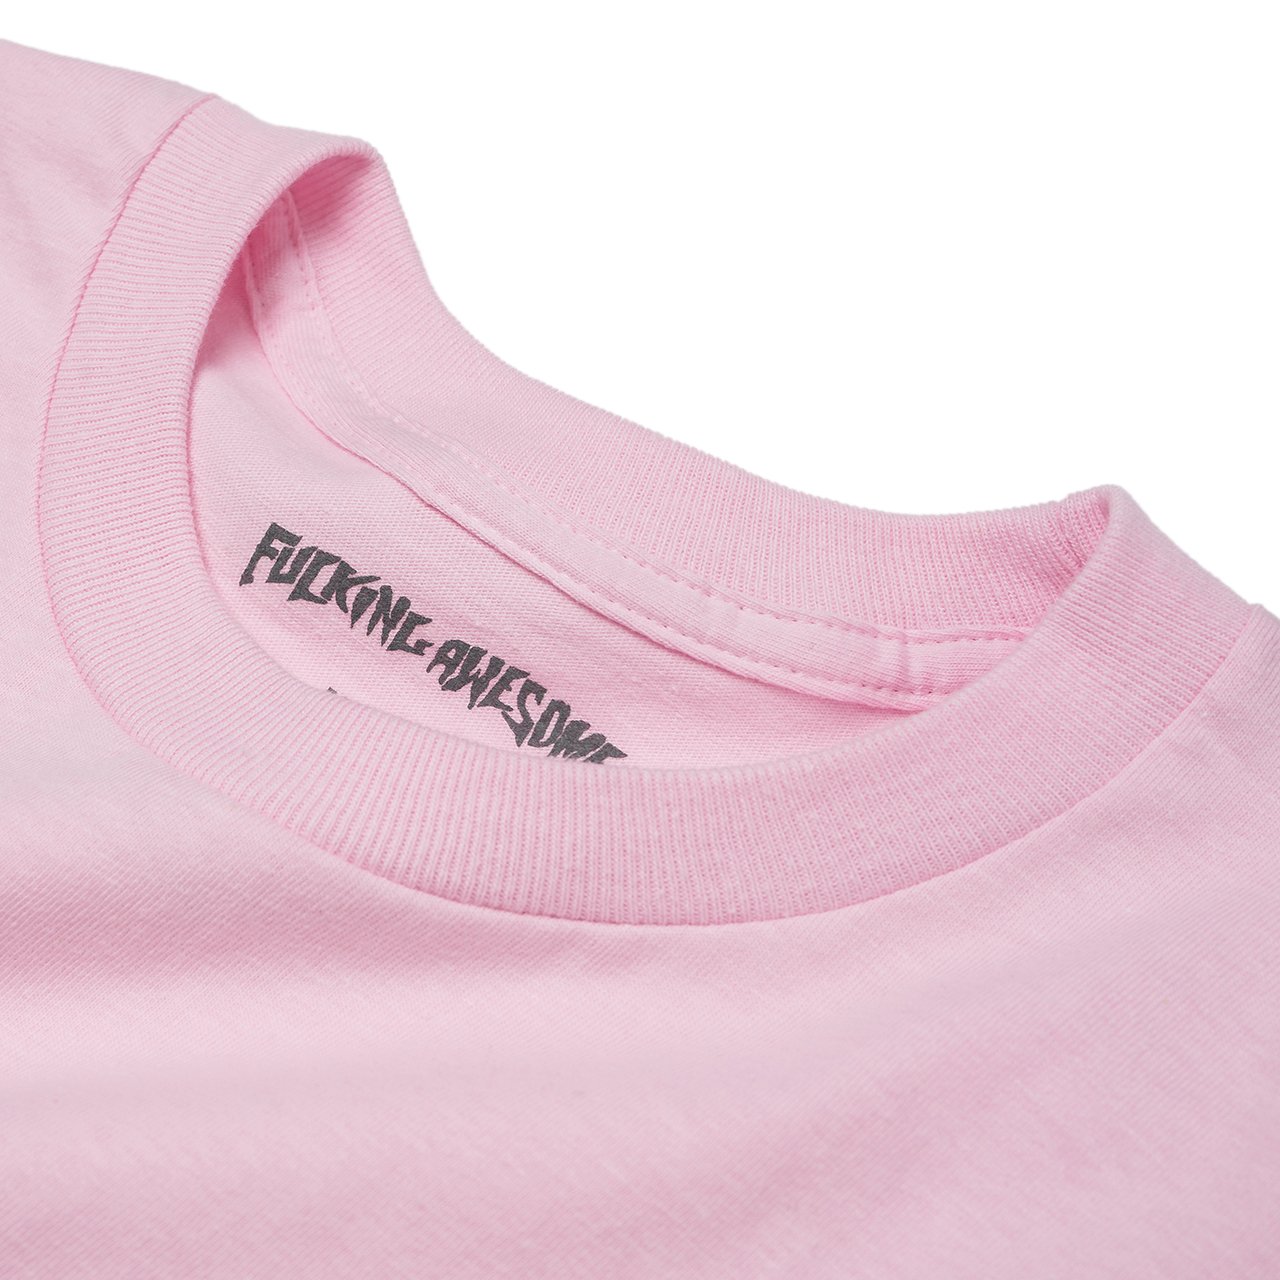 fucking awesome substance t-shirt (light pink) P704057-002 - a.plus